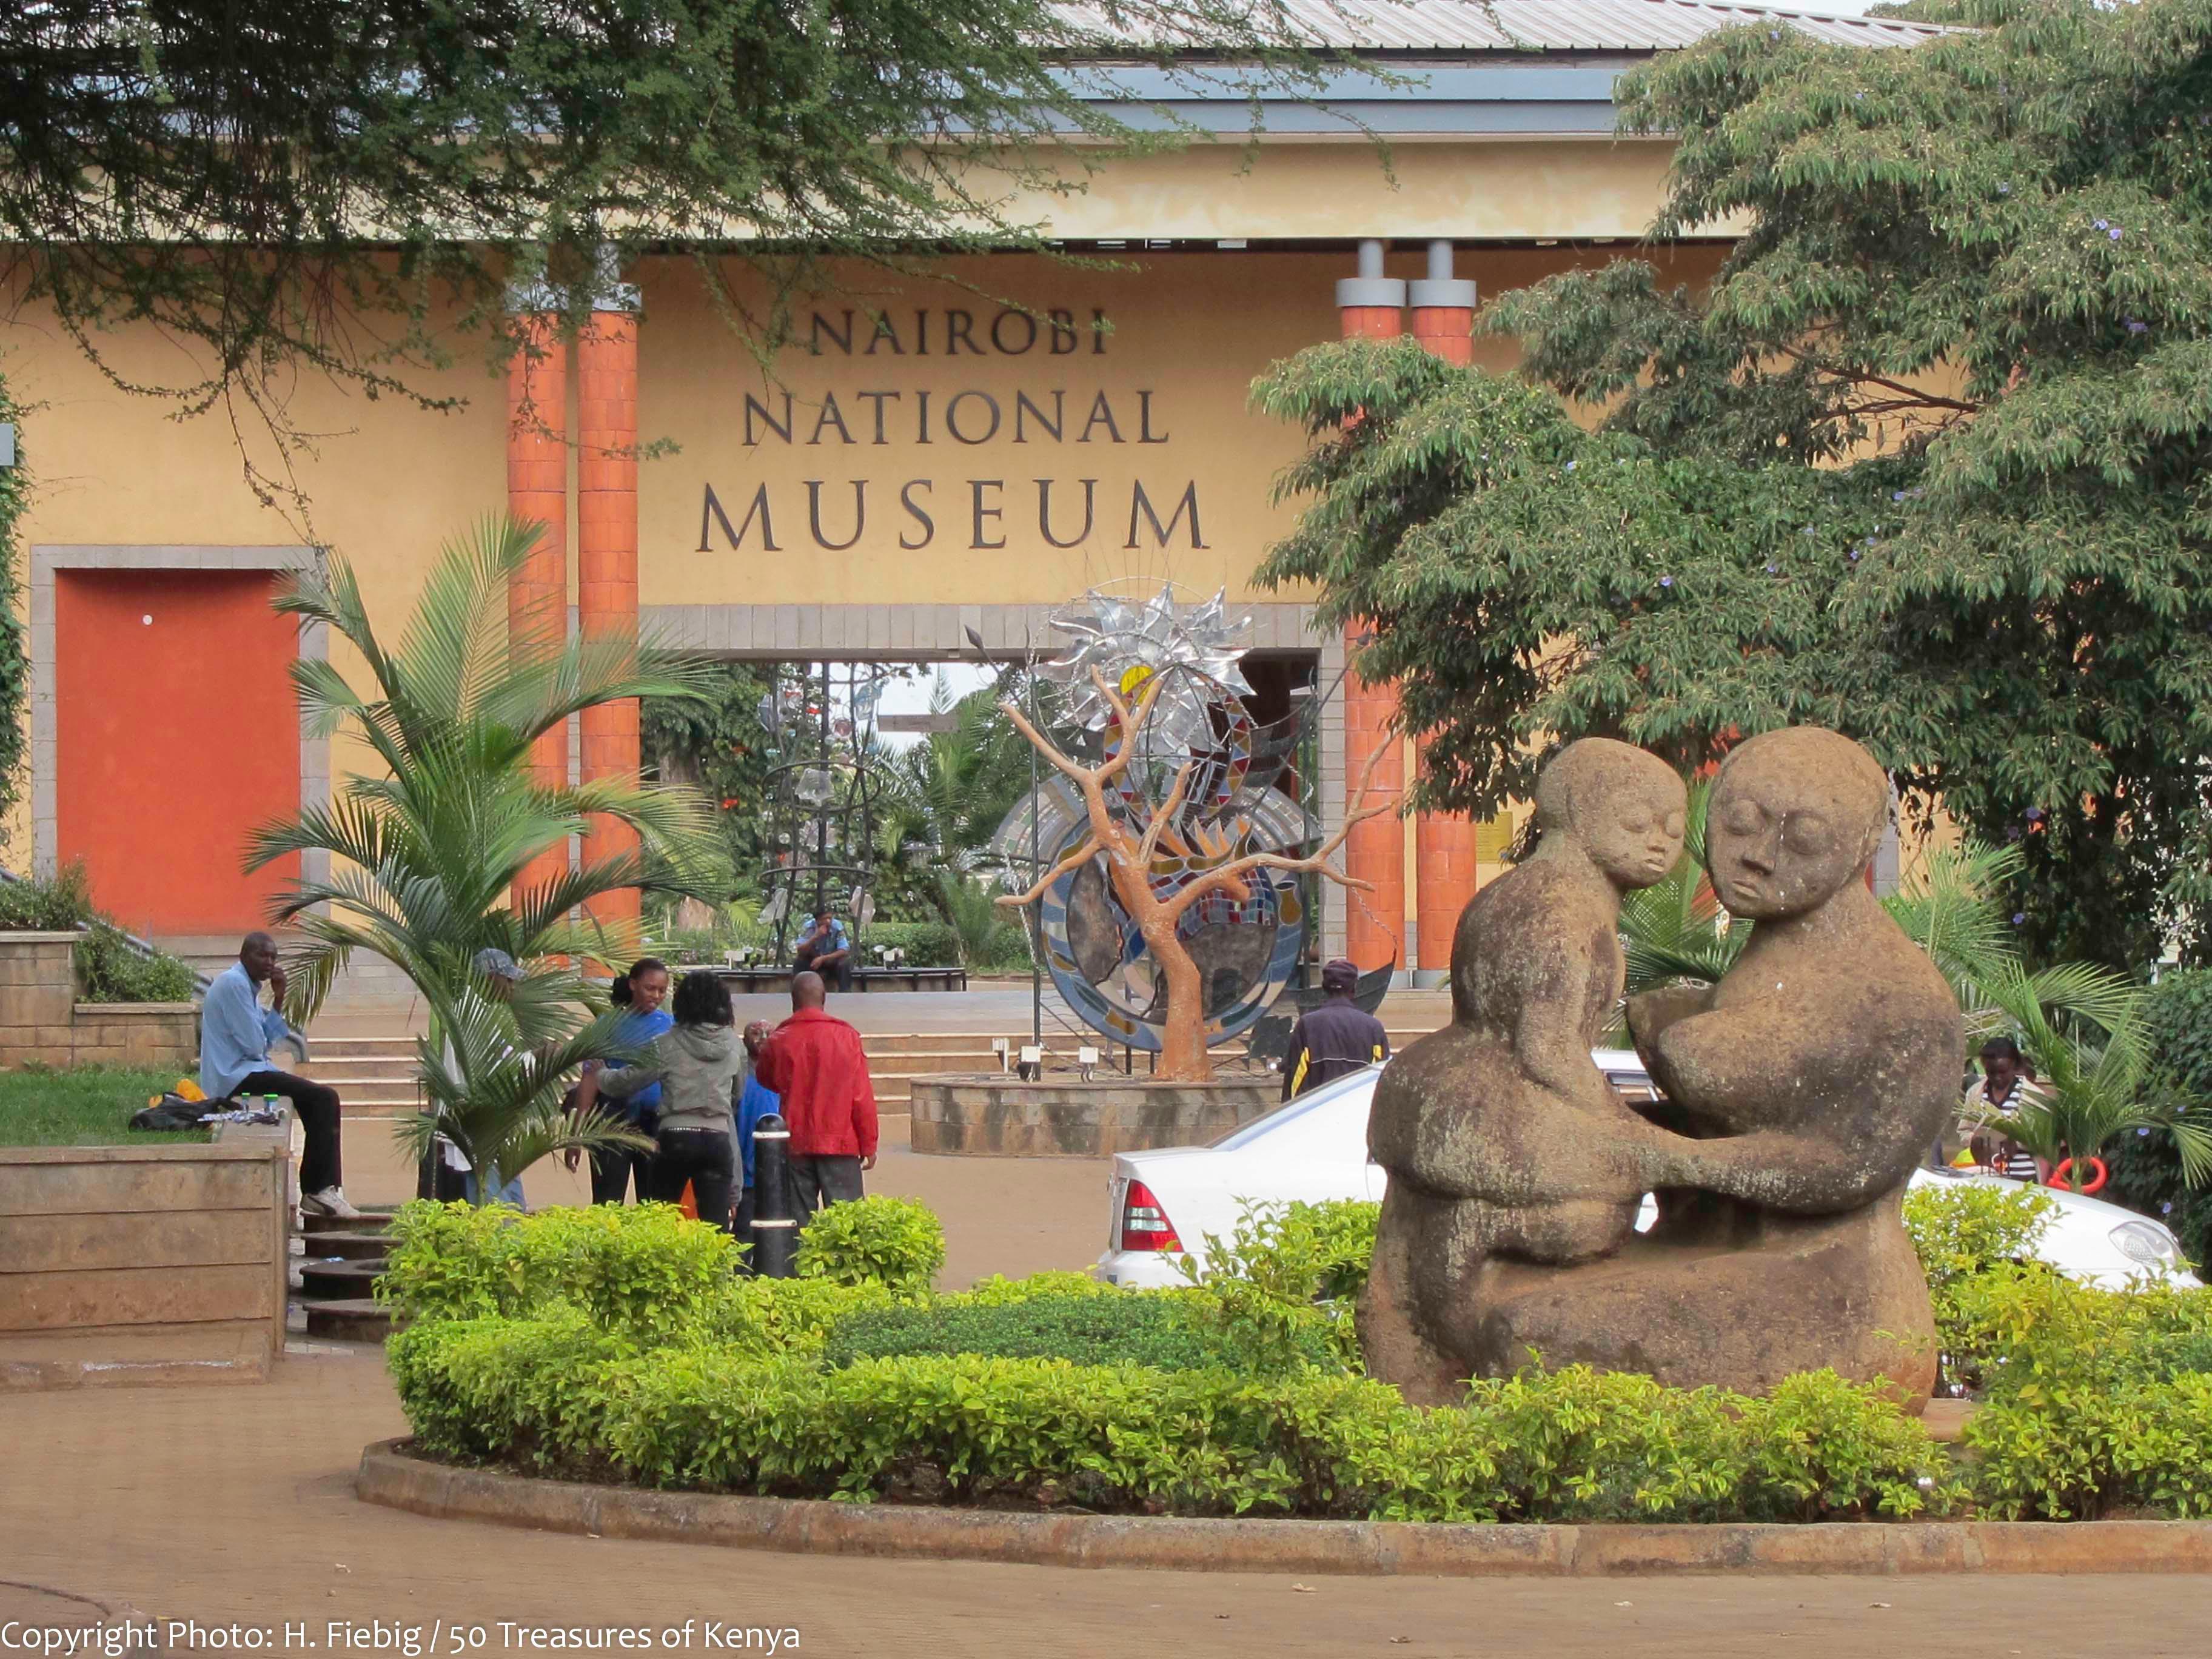 Cover image of this place Nairobi National Museum